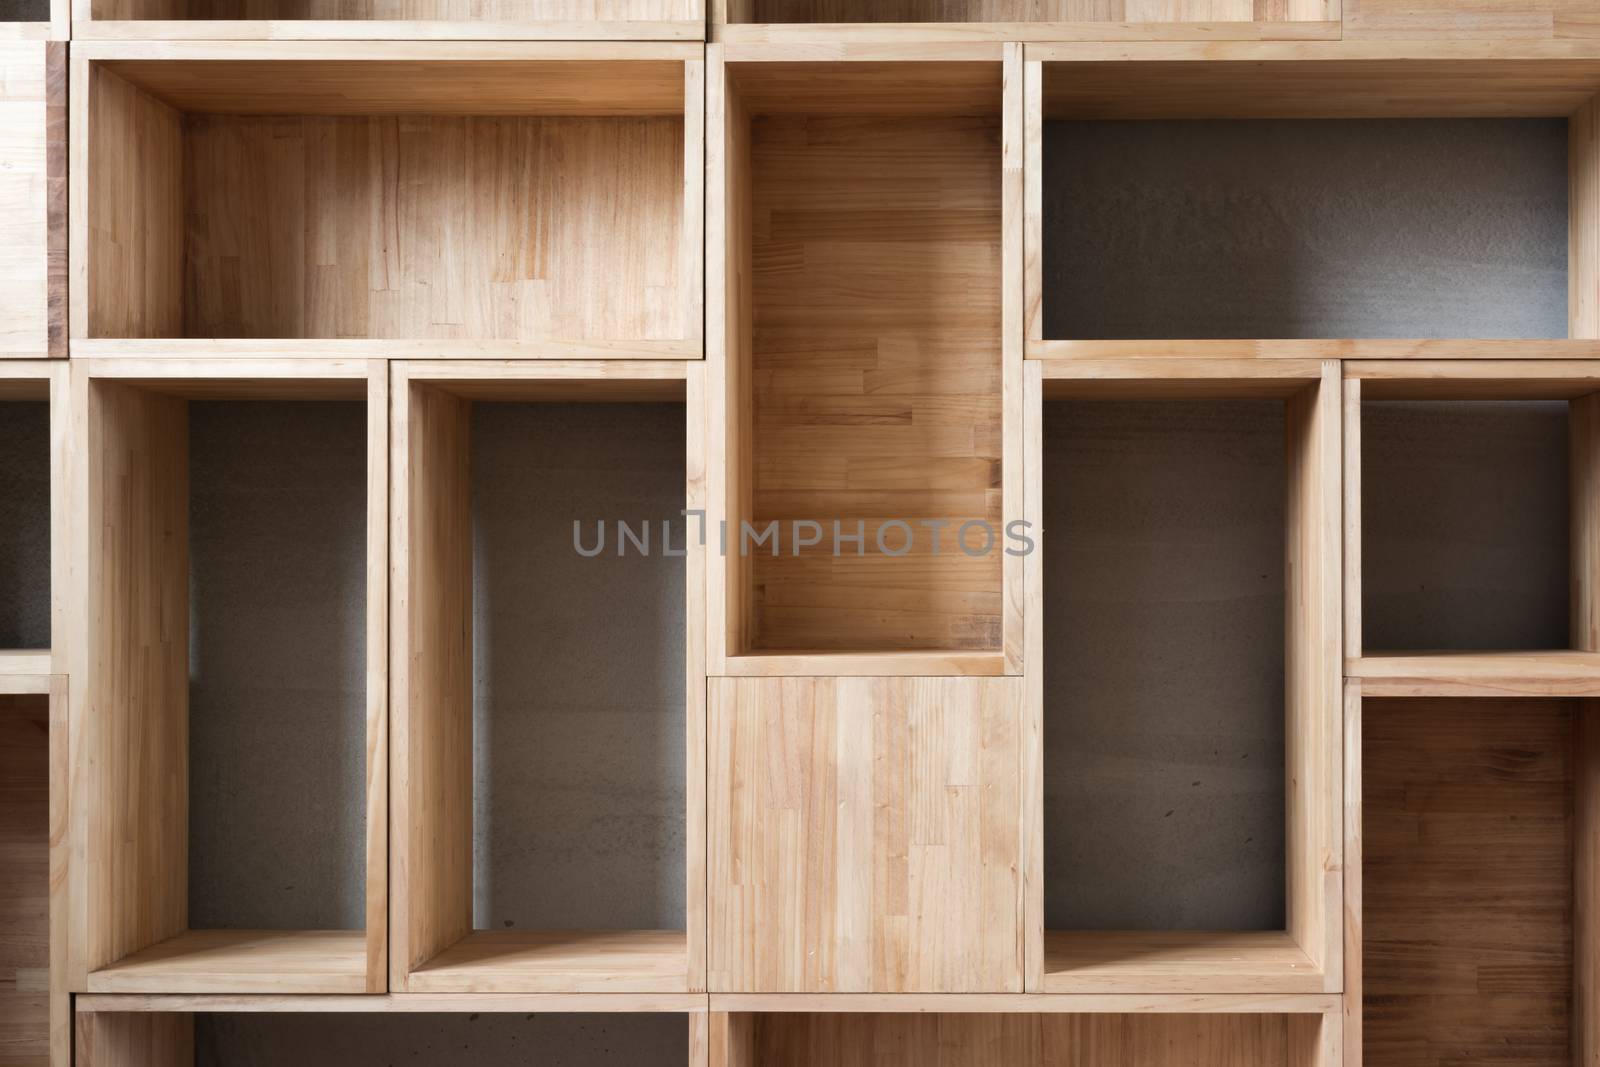 Empty wooden boxes on the ground in a room.